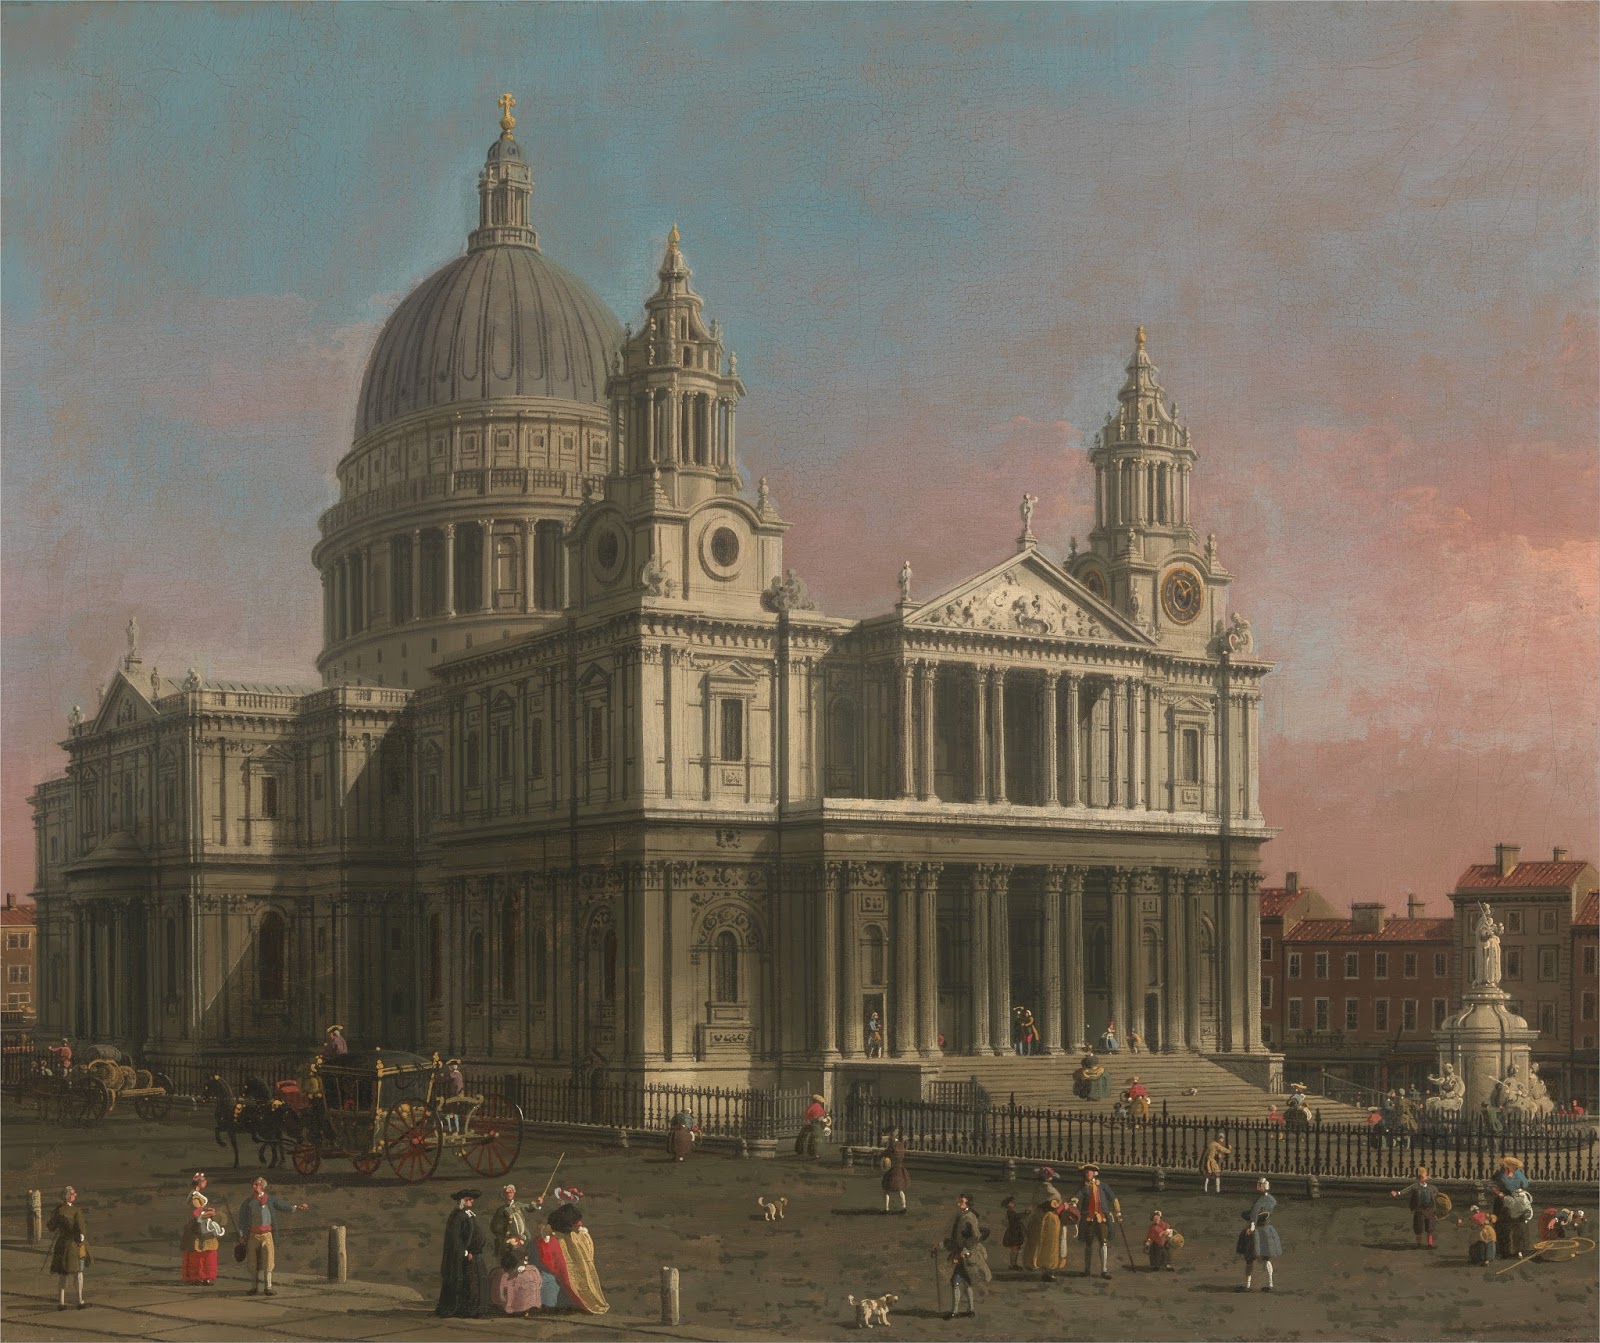 Canaletto-1697-1768 (11).jpg